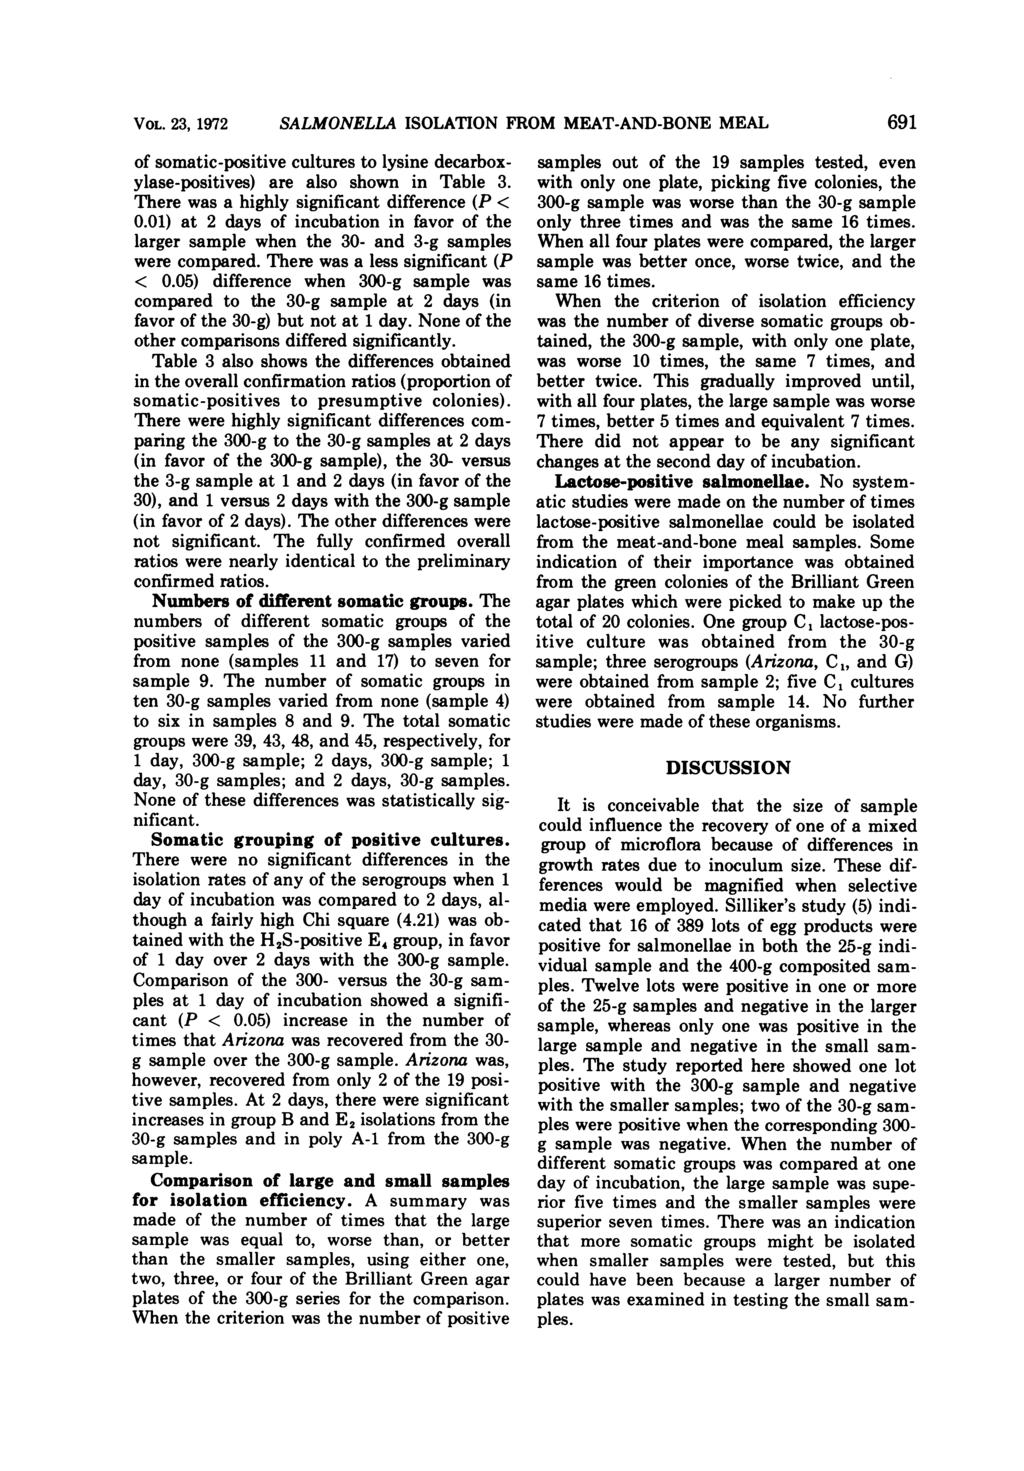 VOL. 23, 1972 SALMONELLA ISOLATION FROM MEAT-AND-BONE MEAL of somatic-positive cultures to lysine decarboxylase-positives) are also shown in Table 3. There was a highly significant difference (P < 0.